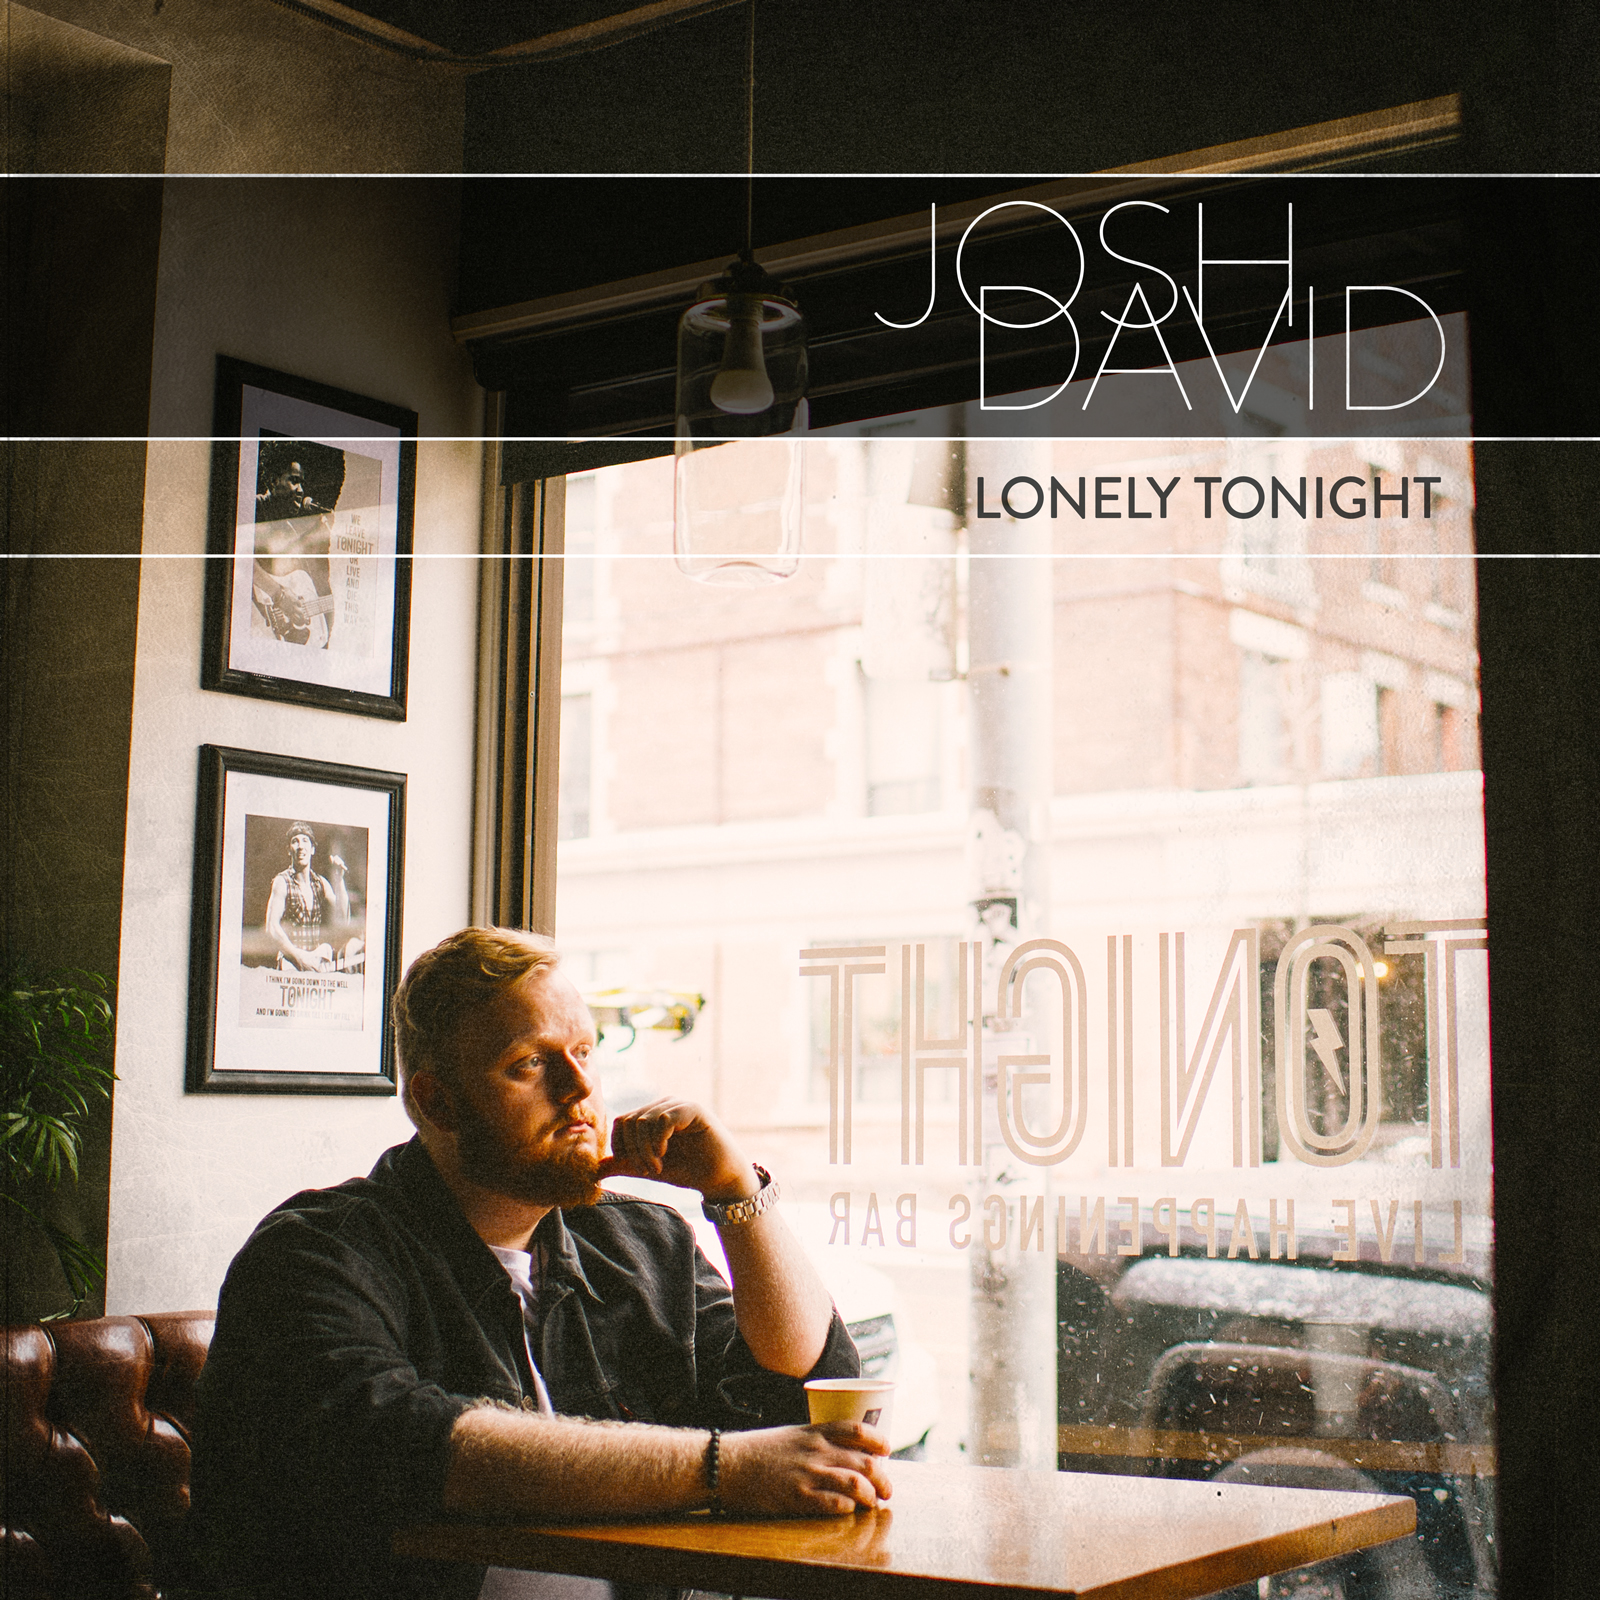 JOSH DAVID STRIKES A CHORD WITH SOPHOMORE SINGLE “LONELY TONIGHT”